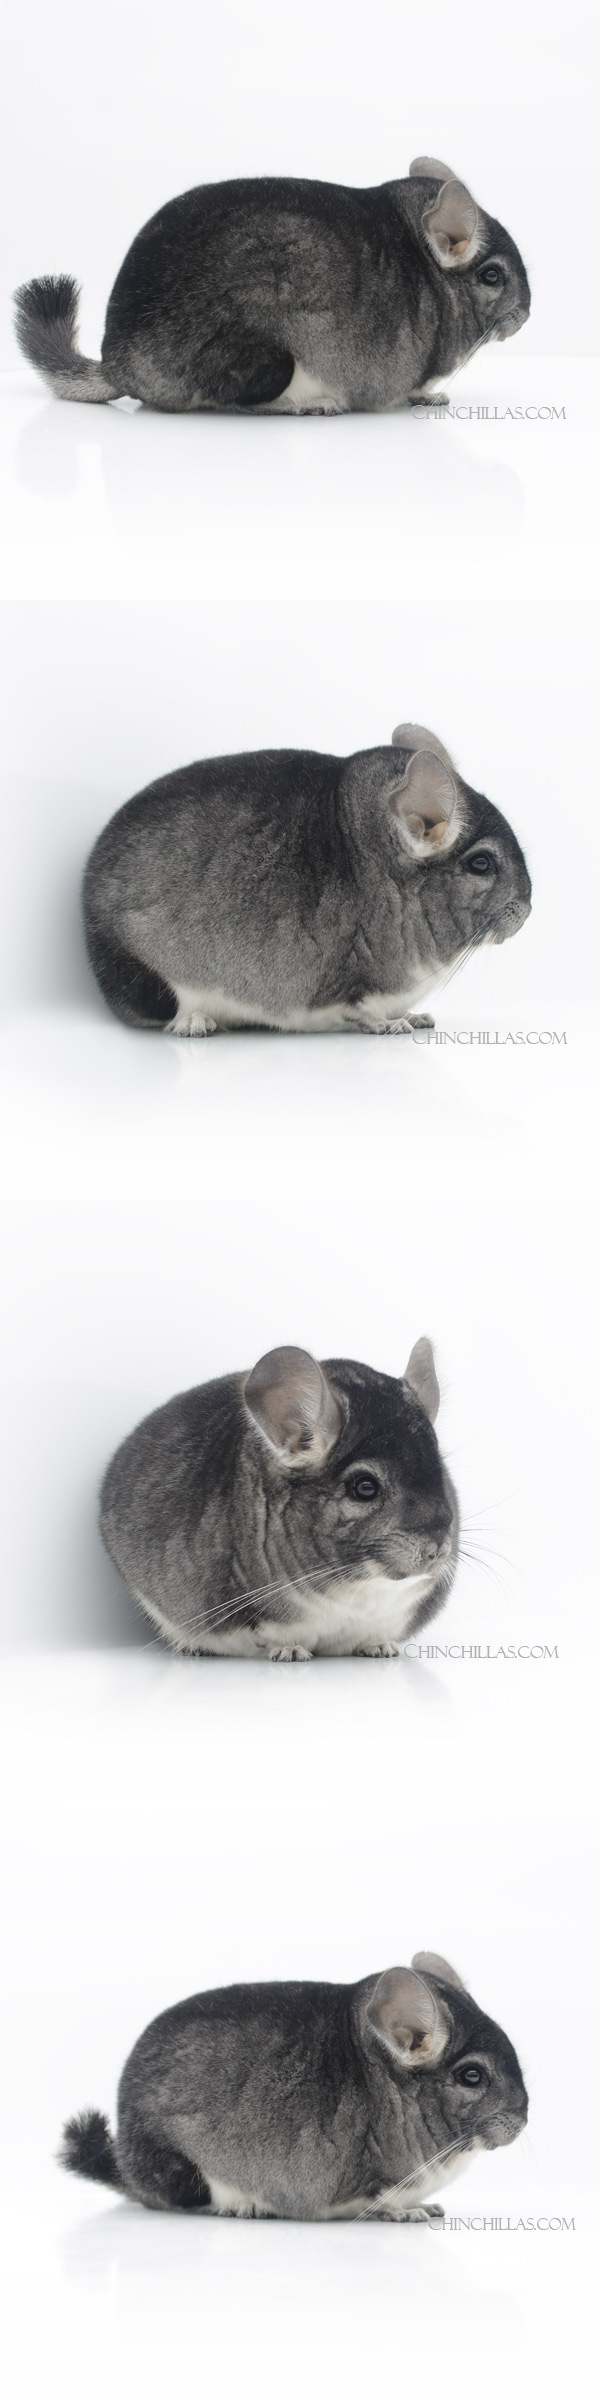 Chinchilla or related item offered for sale or export on Chinchillas.com - 23026 Large Blocky Reserve Class Champion & National 1st Place Standard Male Chinchilla